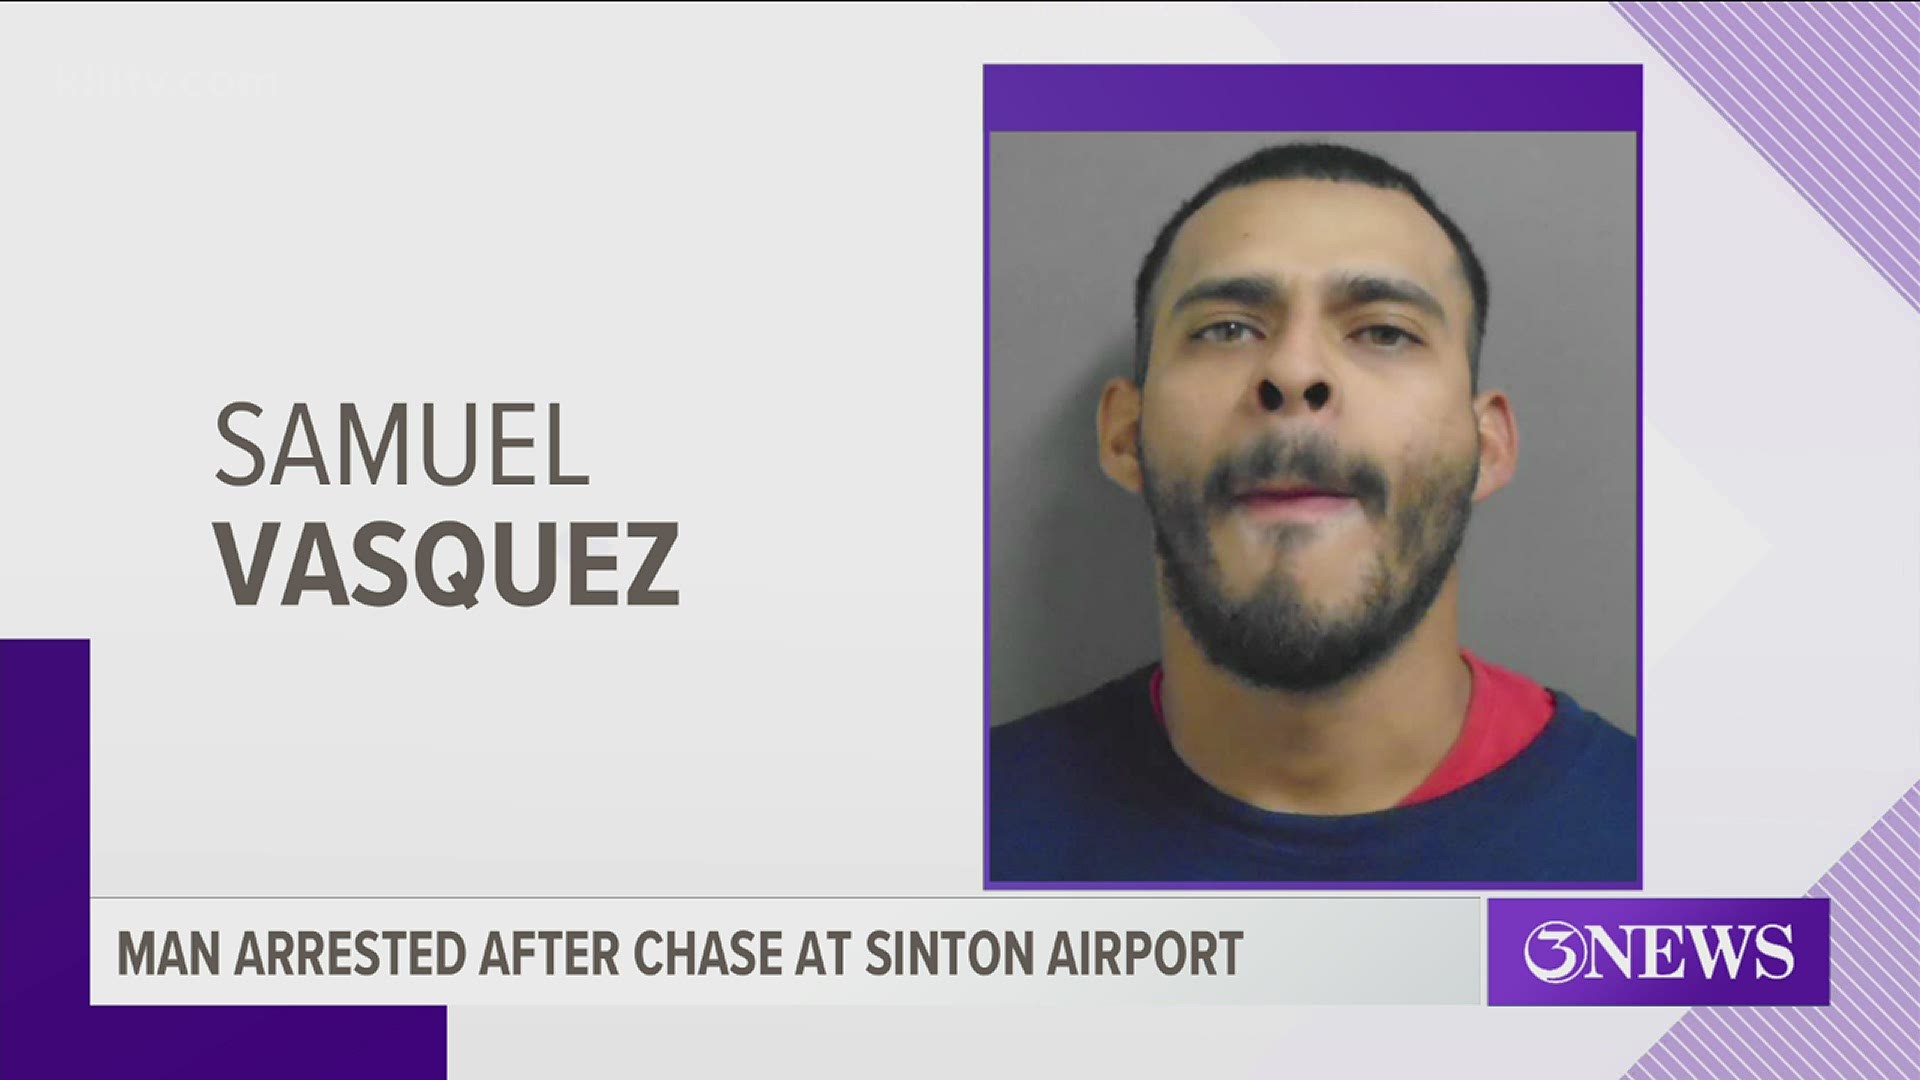 According to Sheriff Oscar Rivera the man was doing donuts by the runway, took off almost clipping a parked aircraft, ran into a ditch, and evaded arrest.